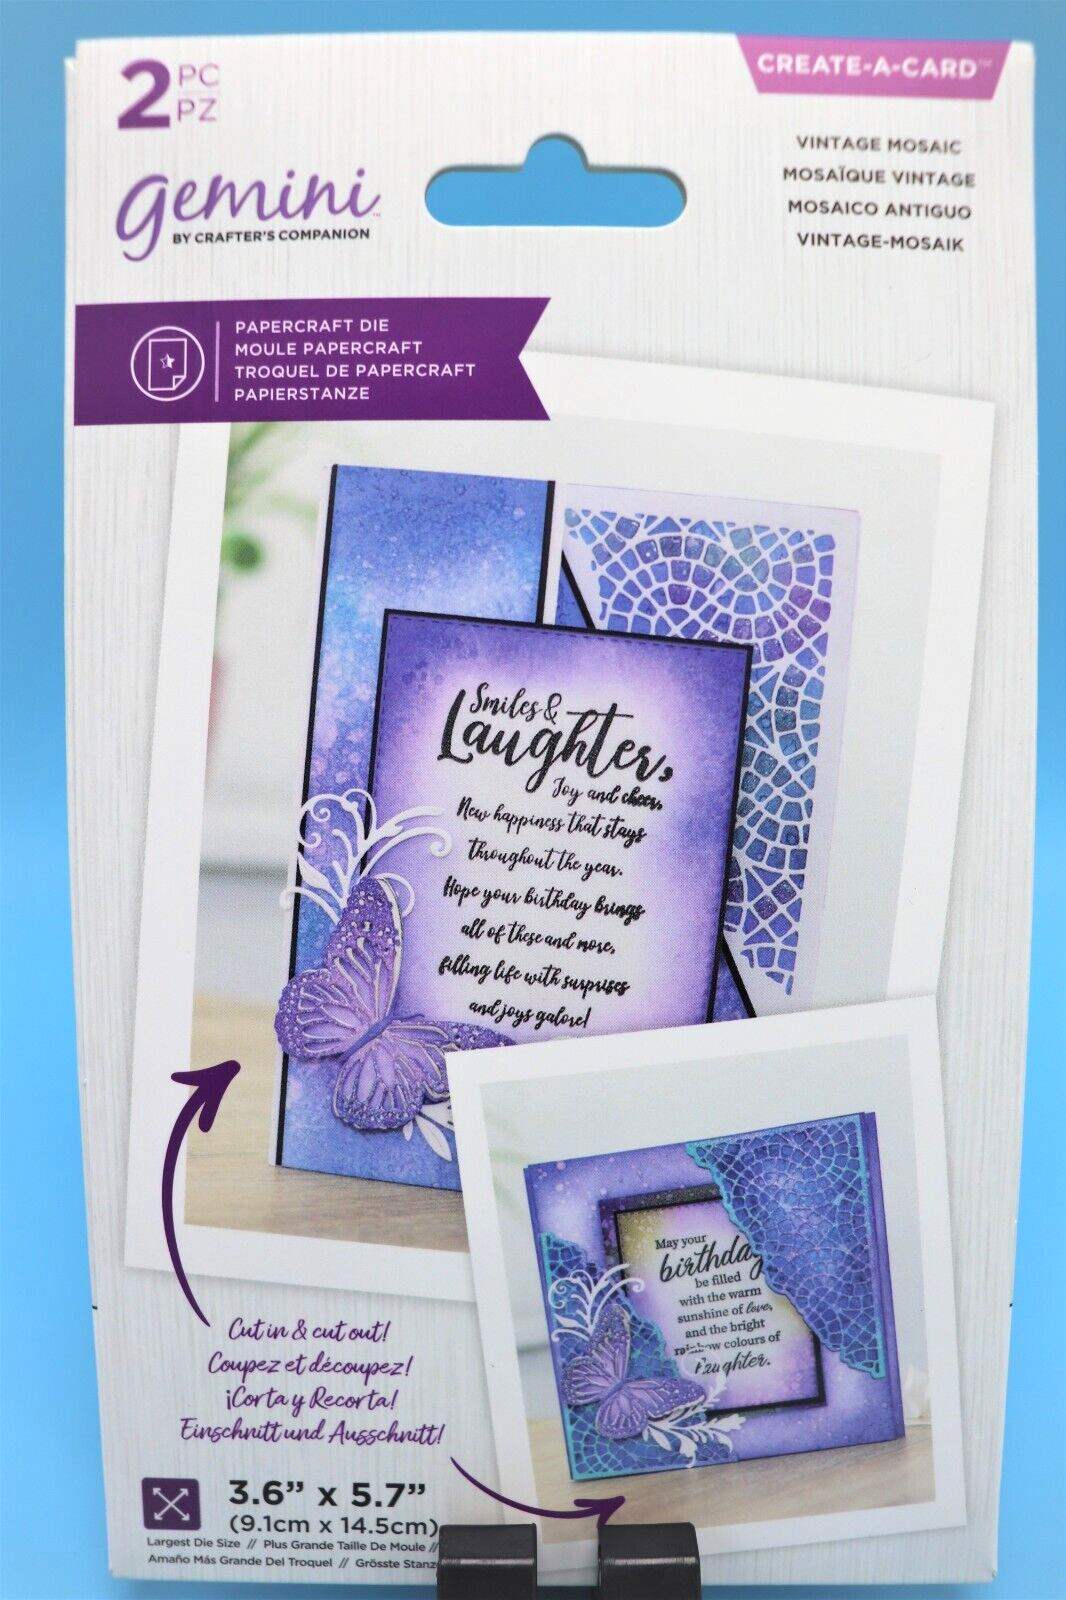 NEW gemini Create a Card Textured Corner Dies by Crafters Companion Gemini Does Not Apply - фотография #5